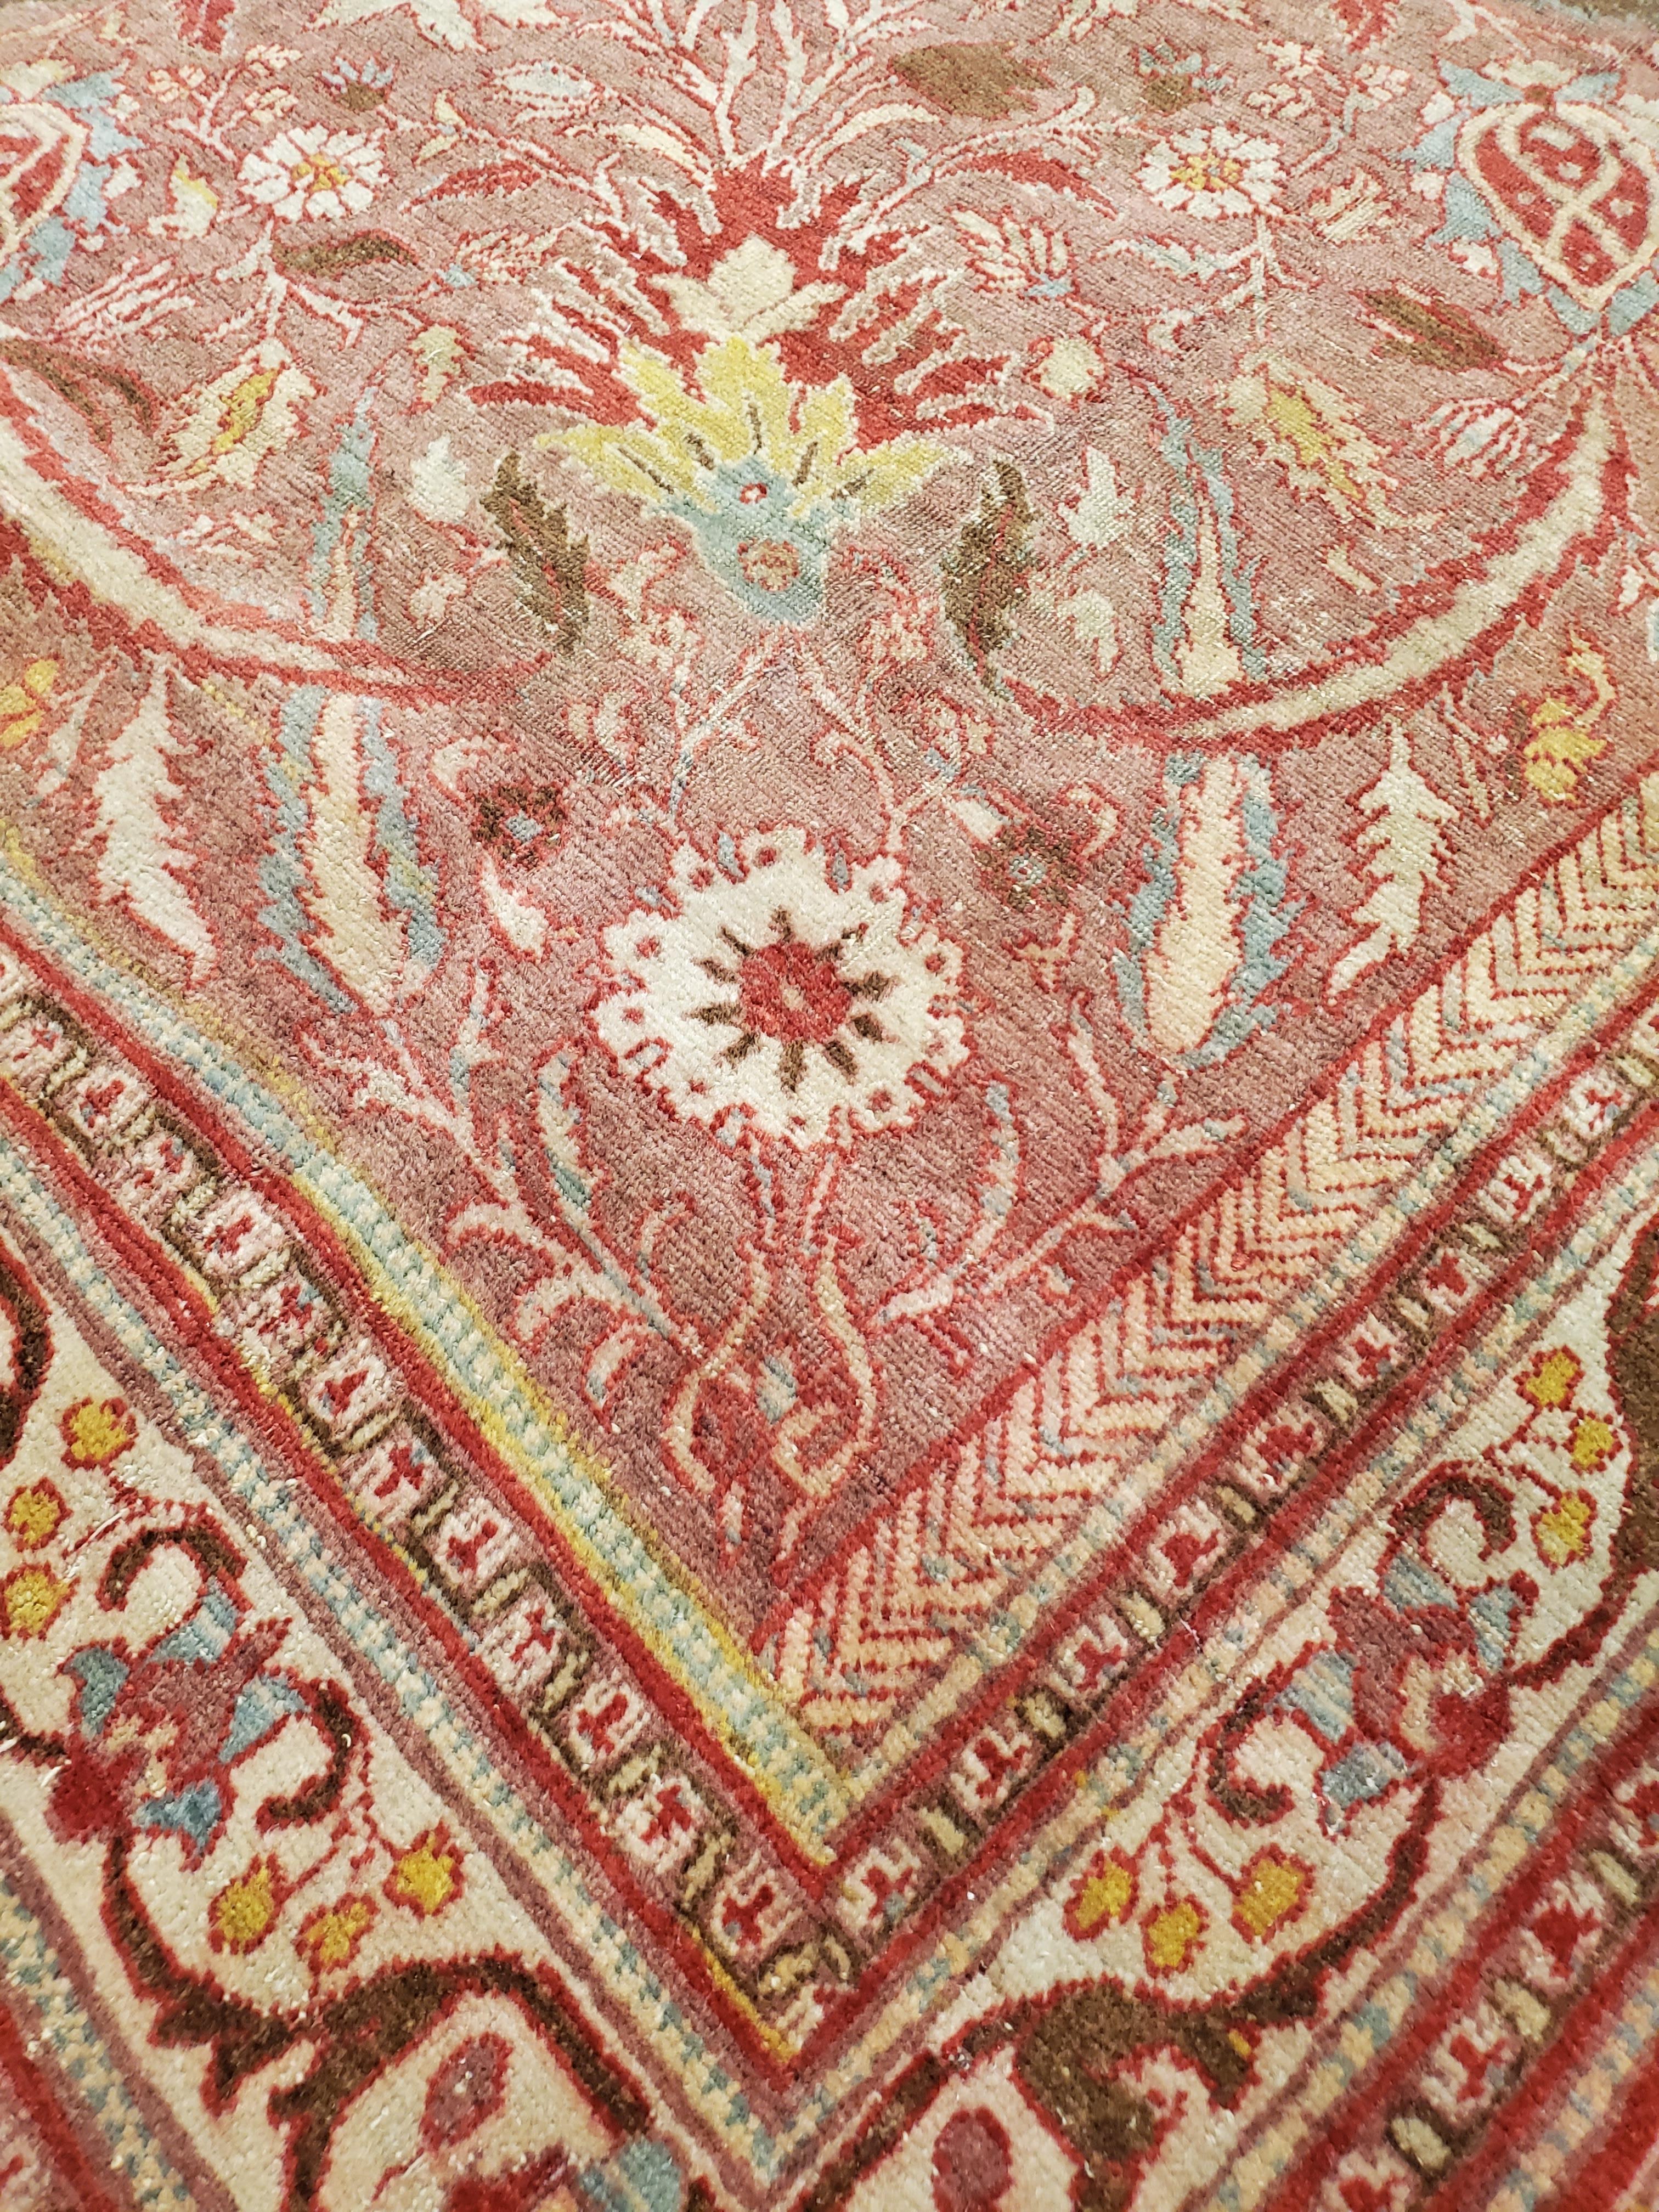 Wool Antique Tabriz Carpet, Handmade Persian Rug in Floral Gold, Red and Beige For Sale